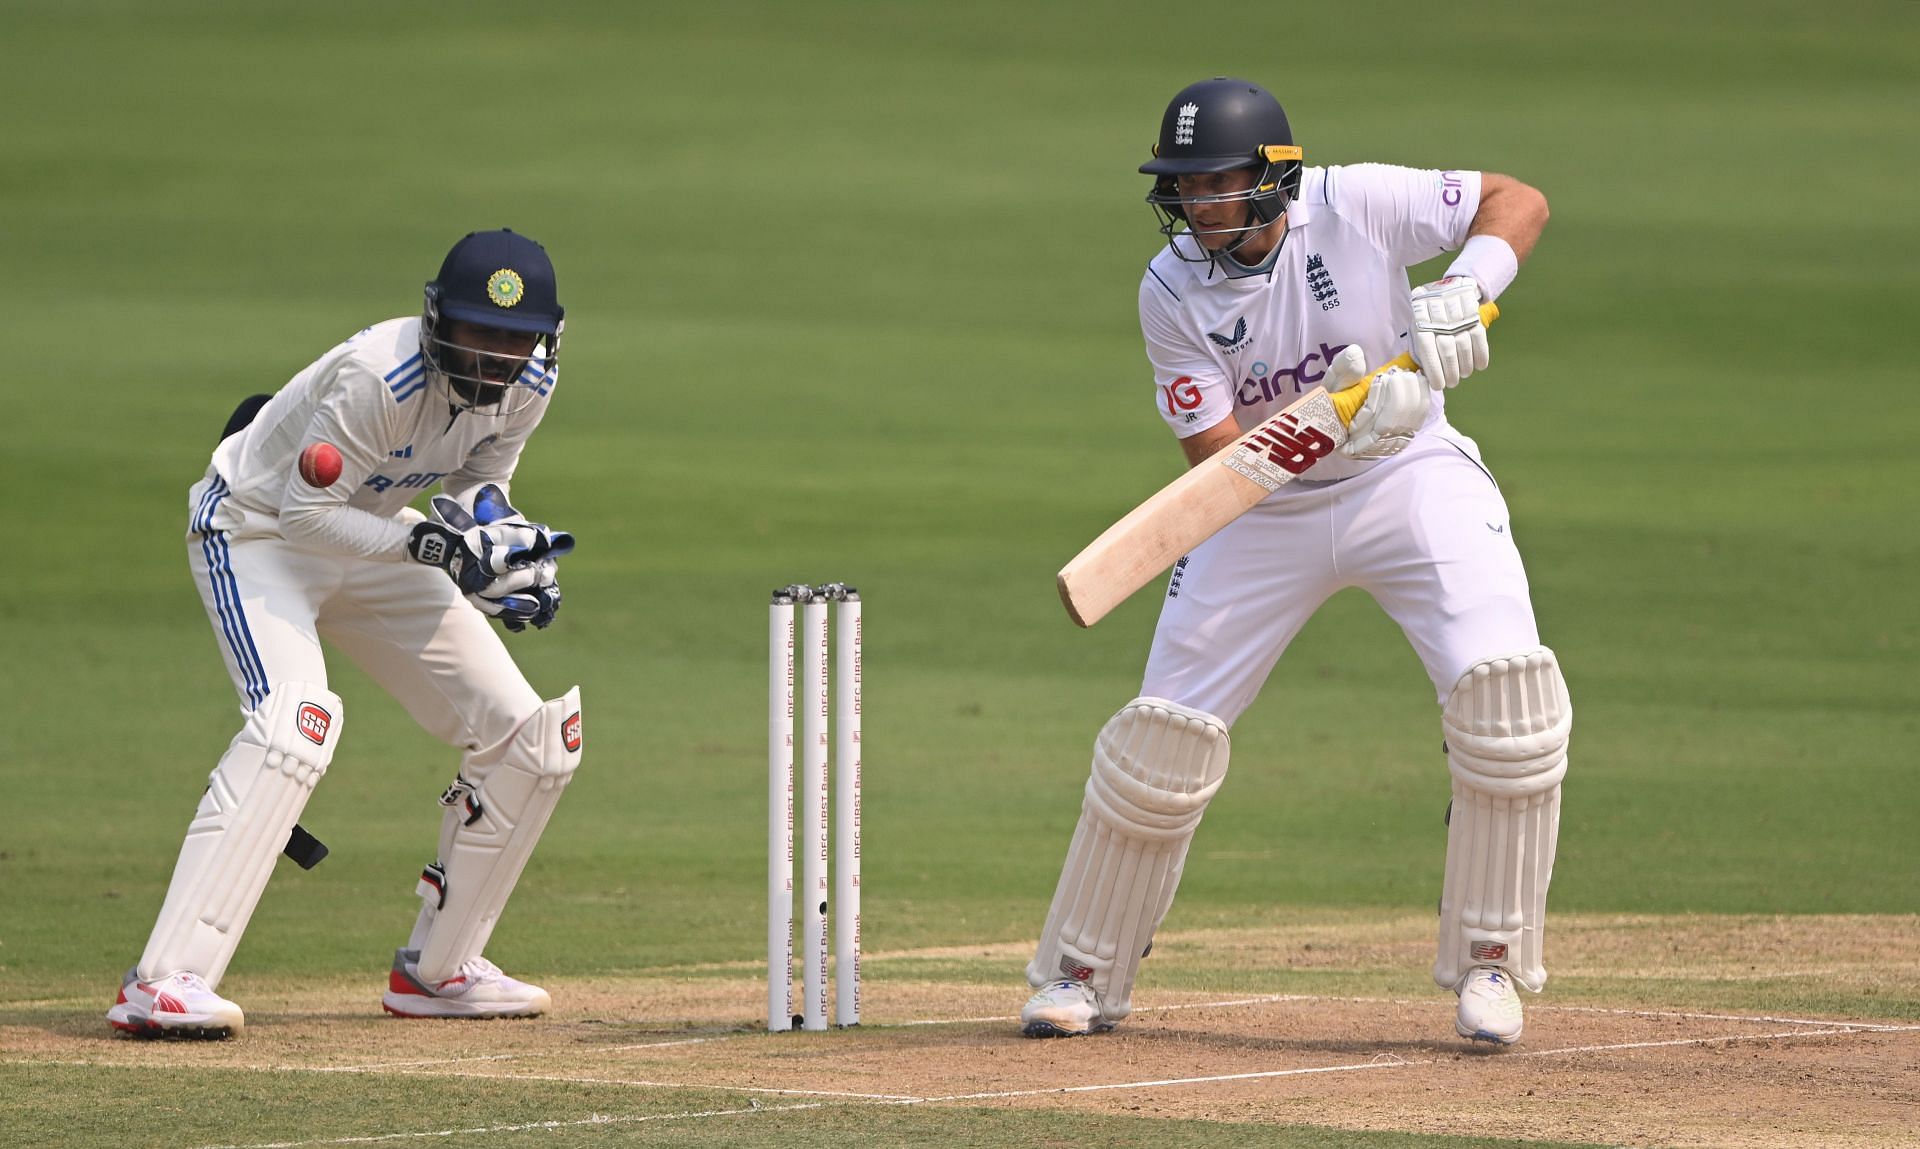 Joe Root in action during the ongoing Test series against India